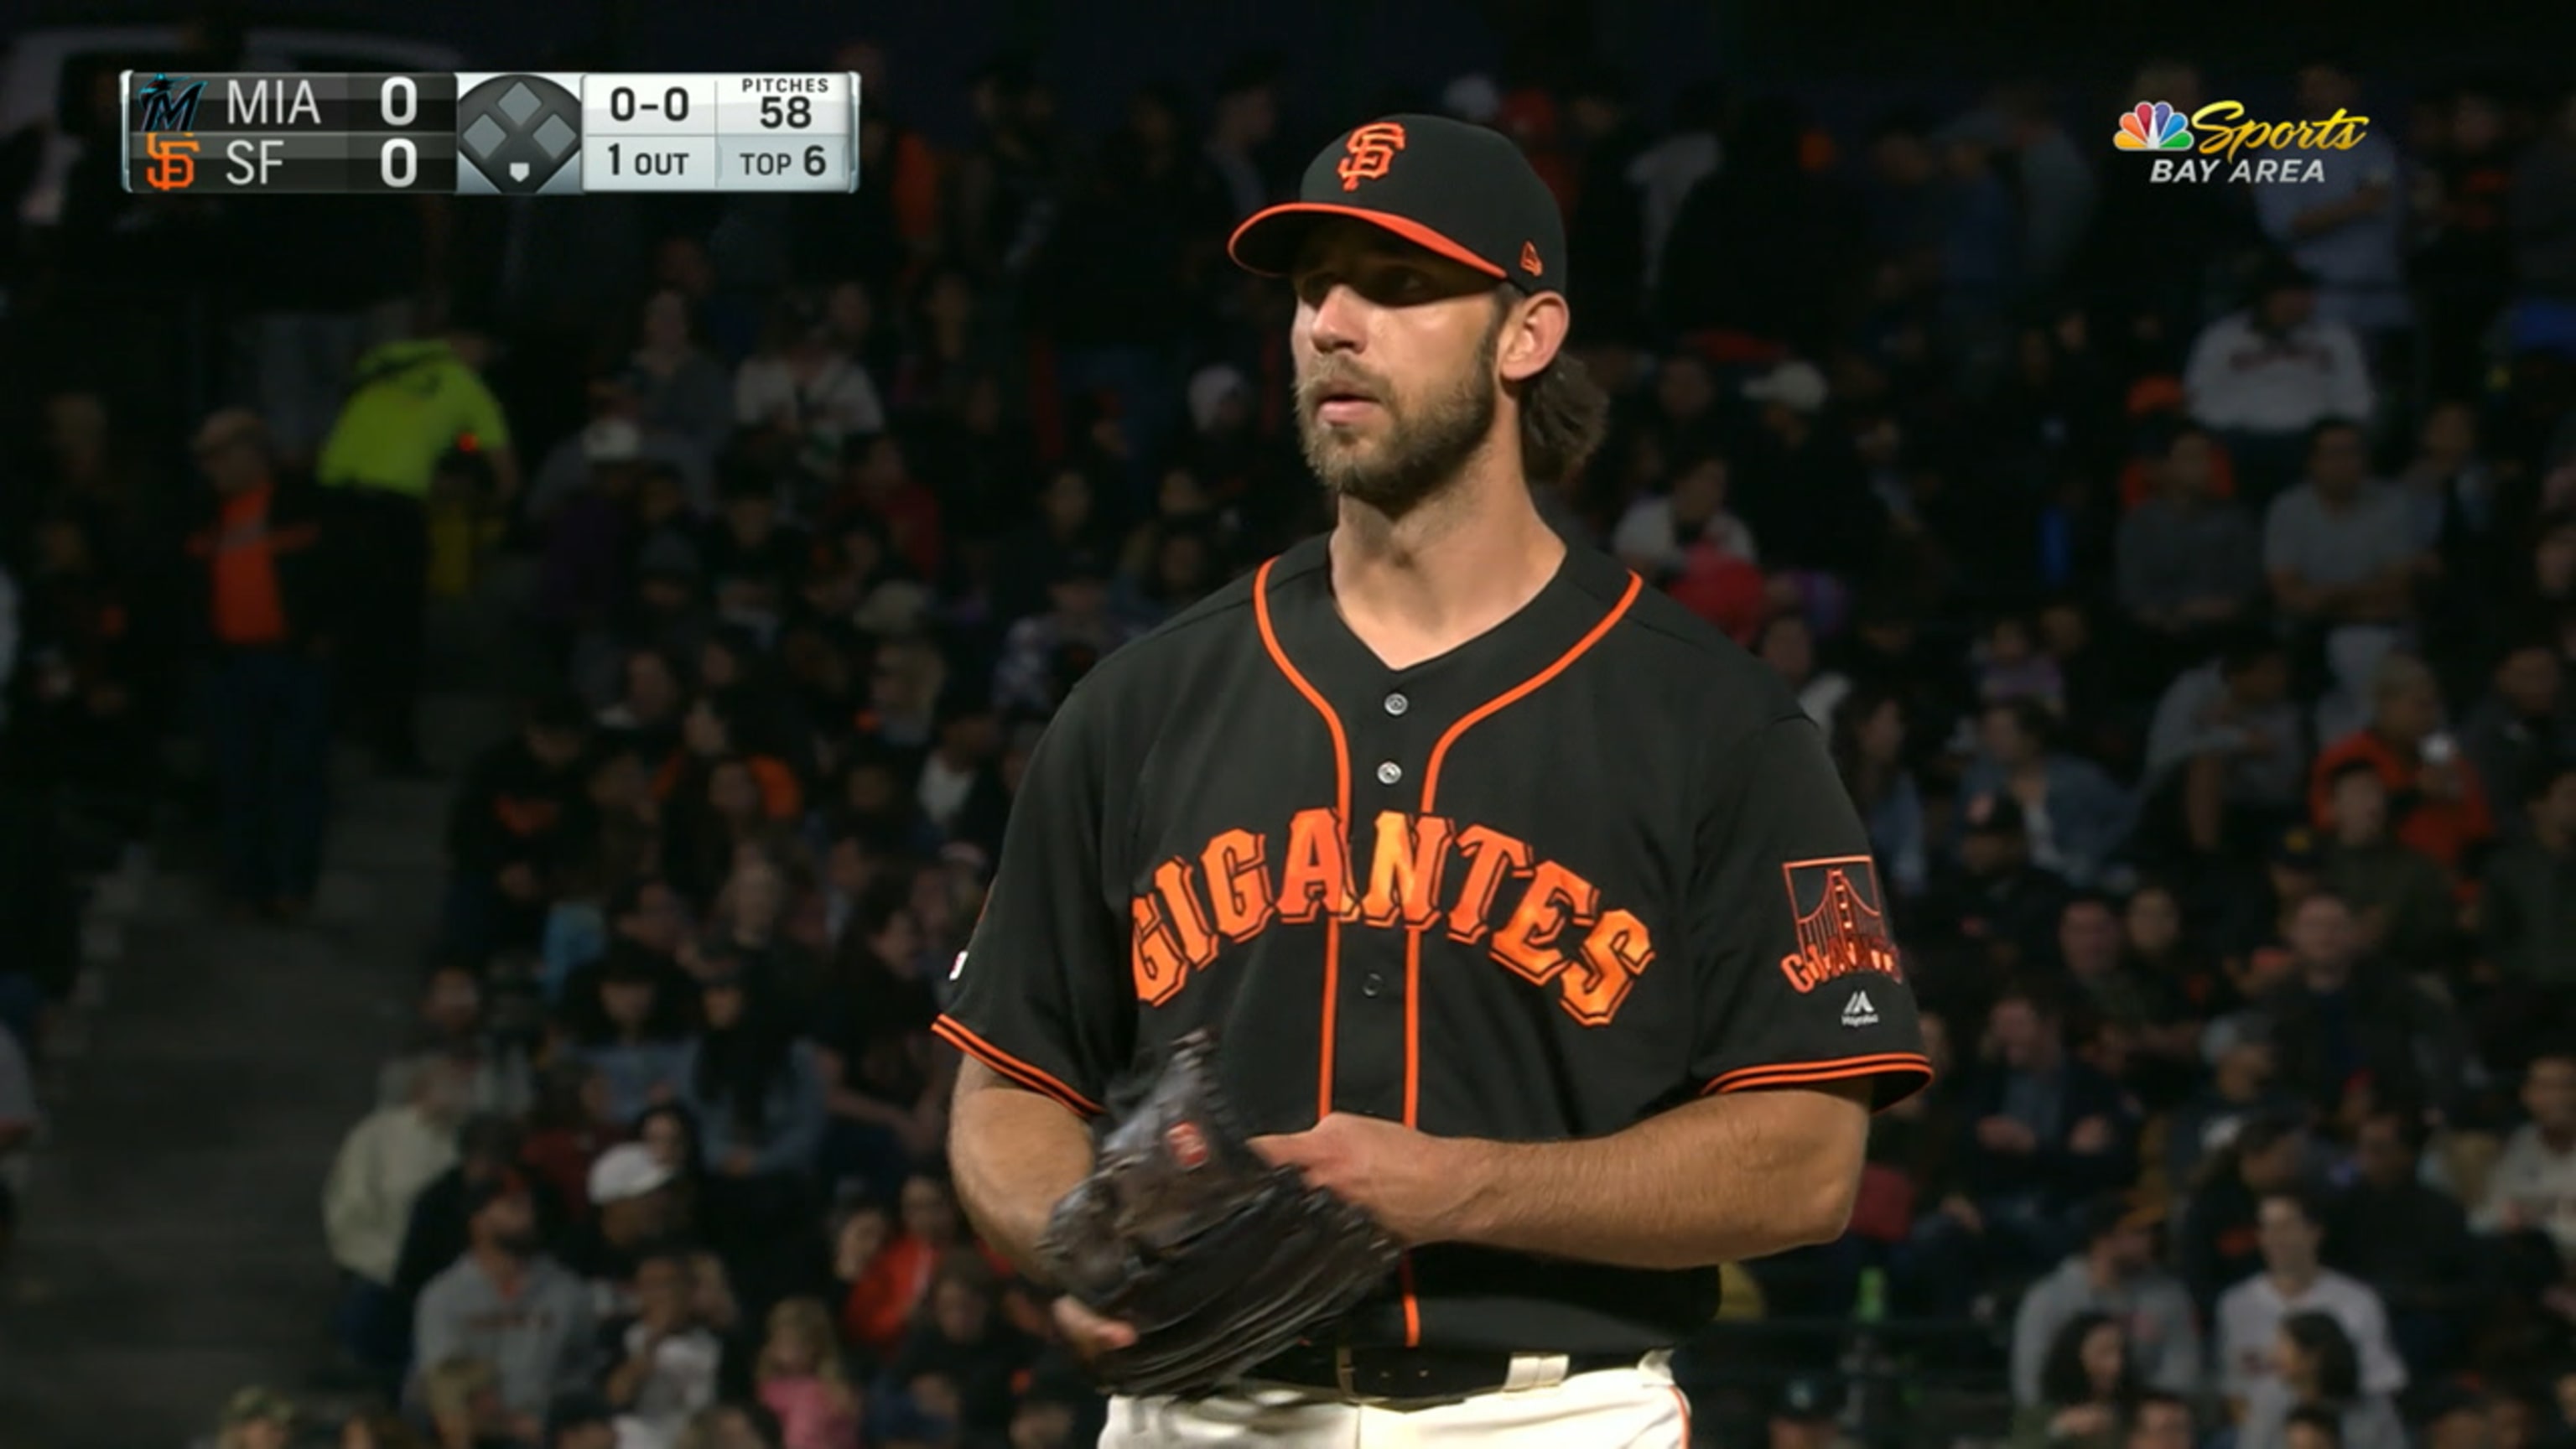 Giants' Madison Bumgarner hits home runs in BP (VIDEO) - Sports Illustrated